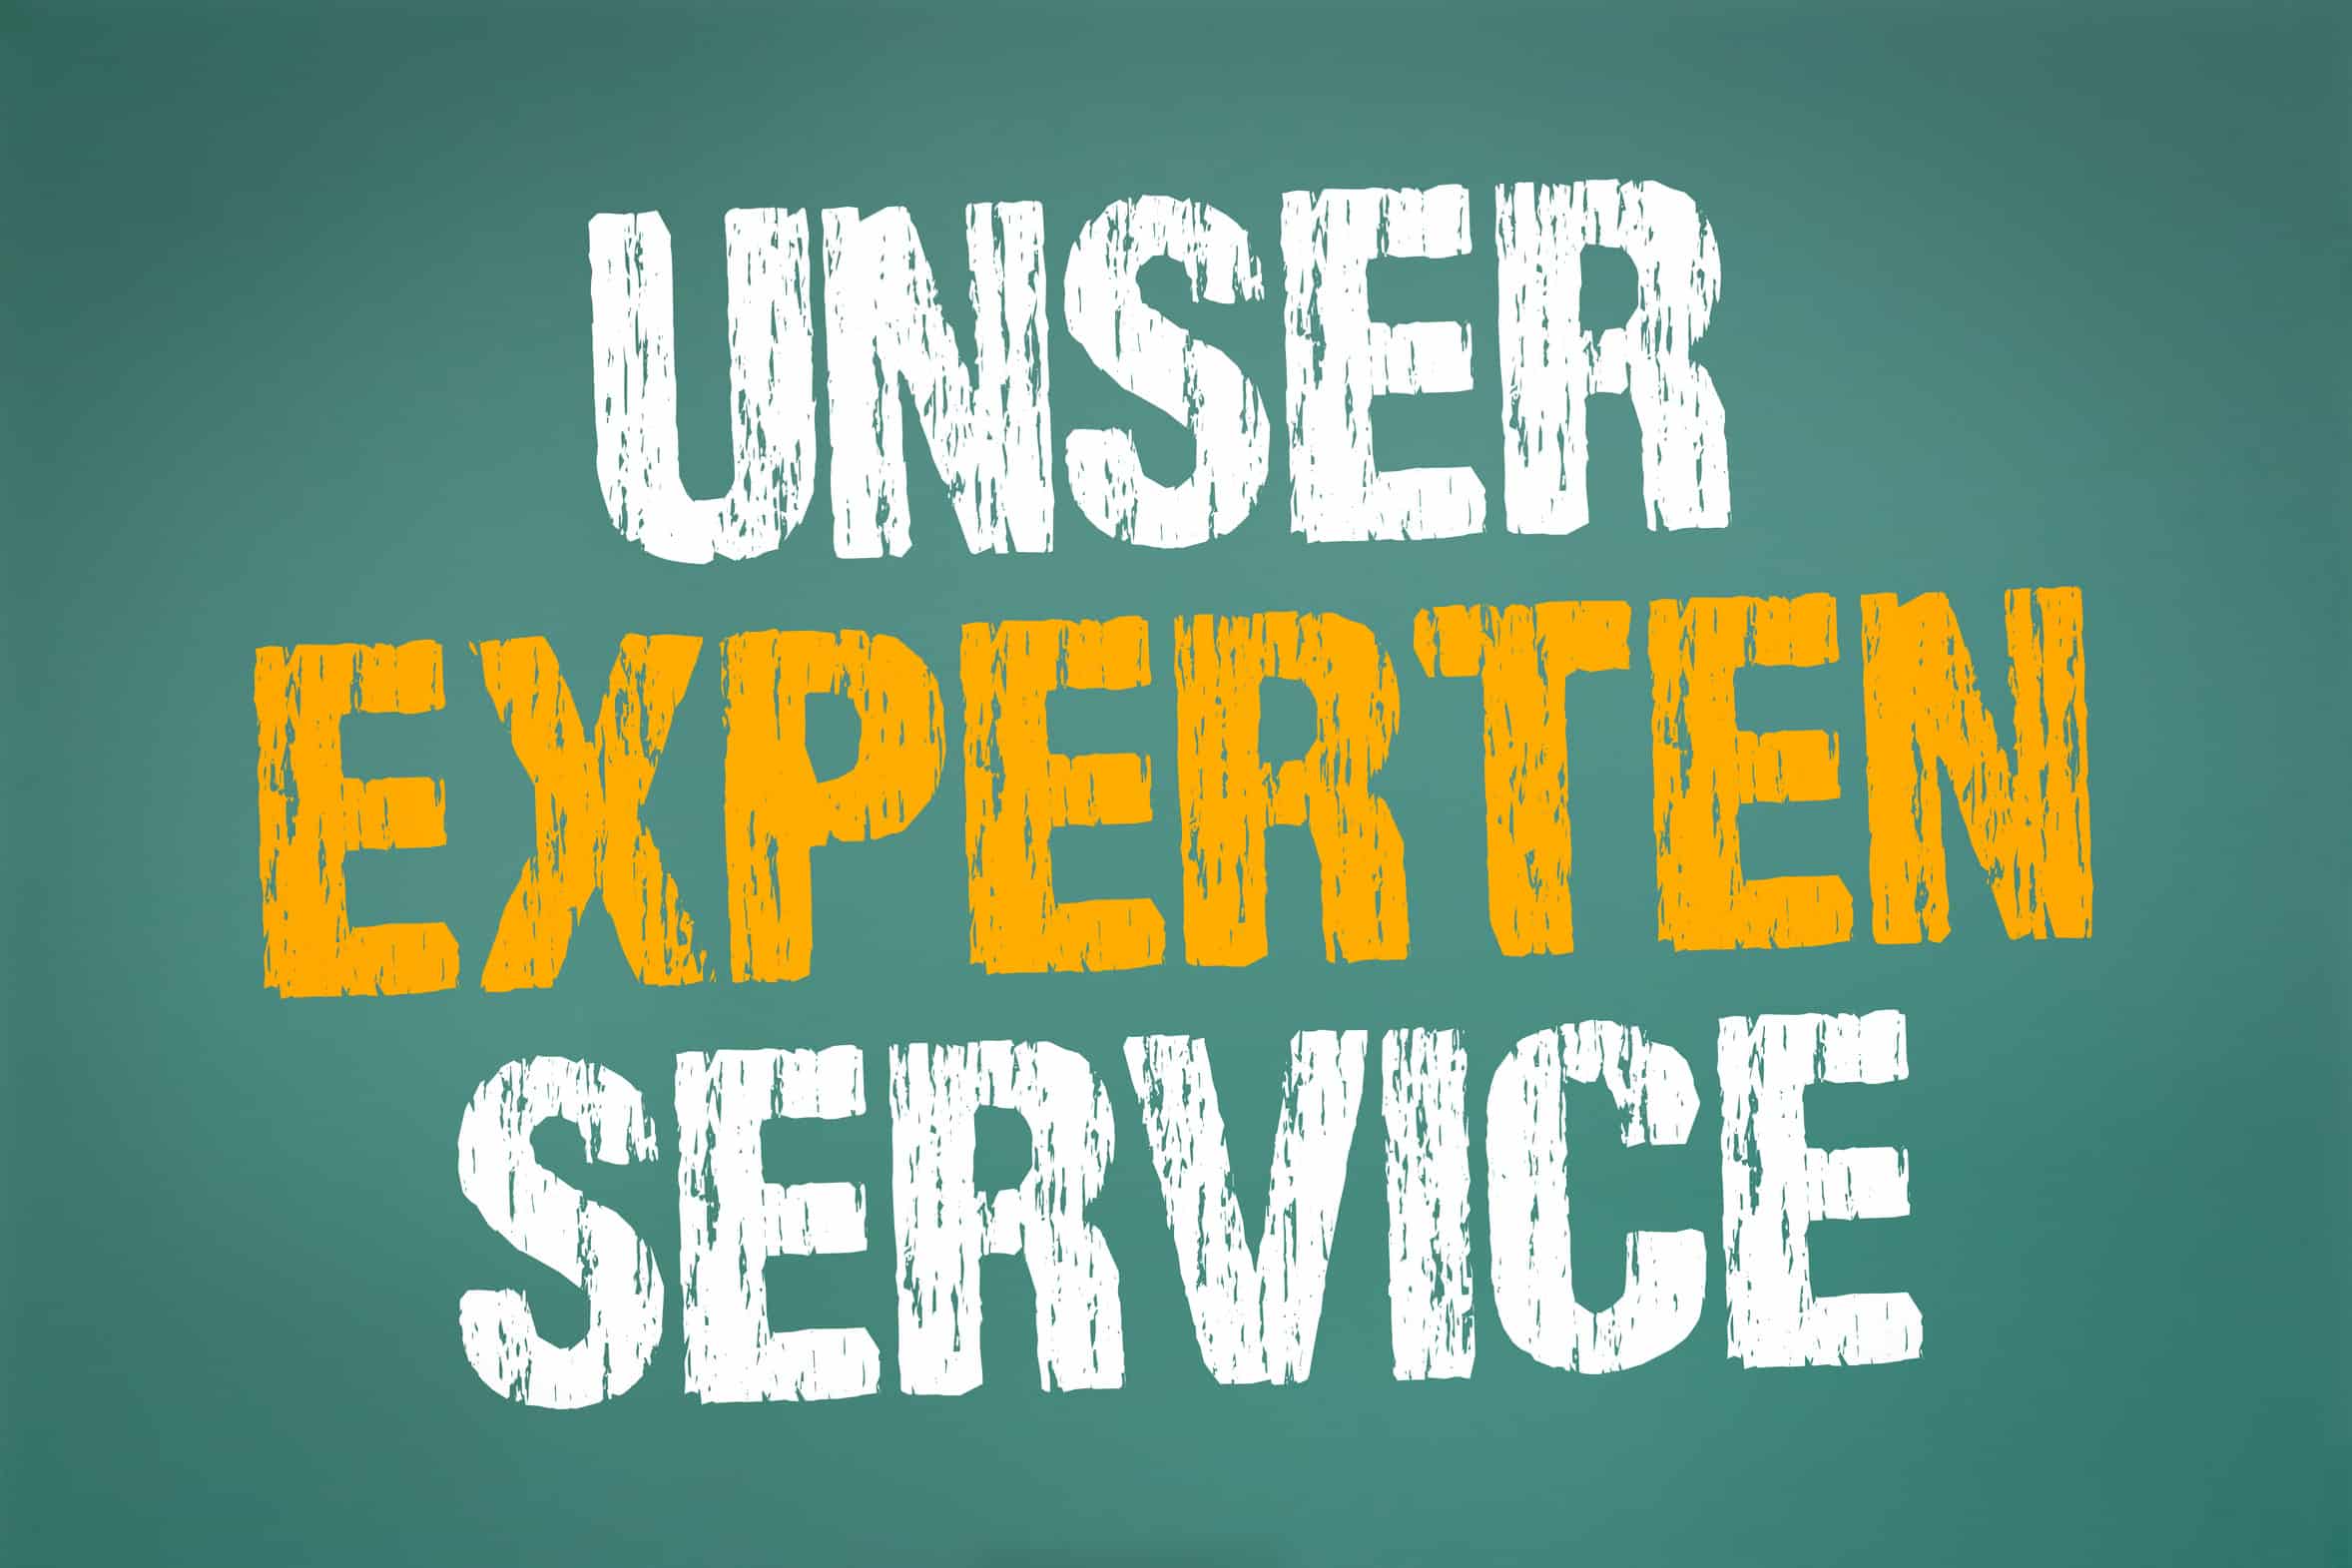 "Our expert service" lettering in white and yellow on a green background